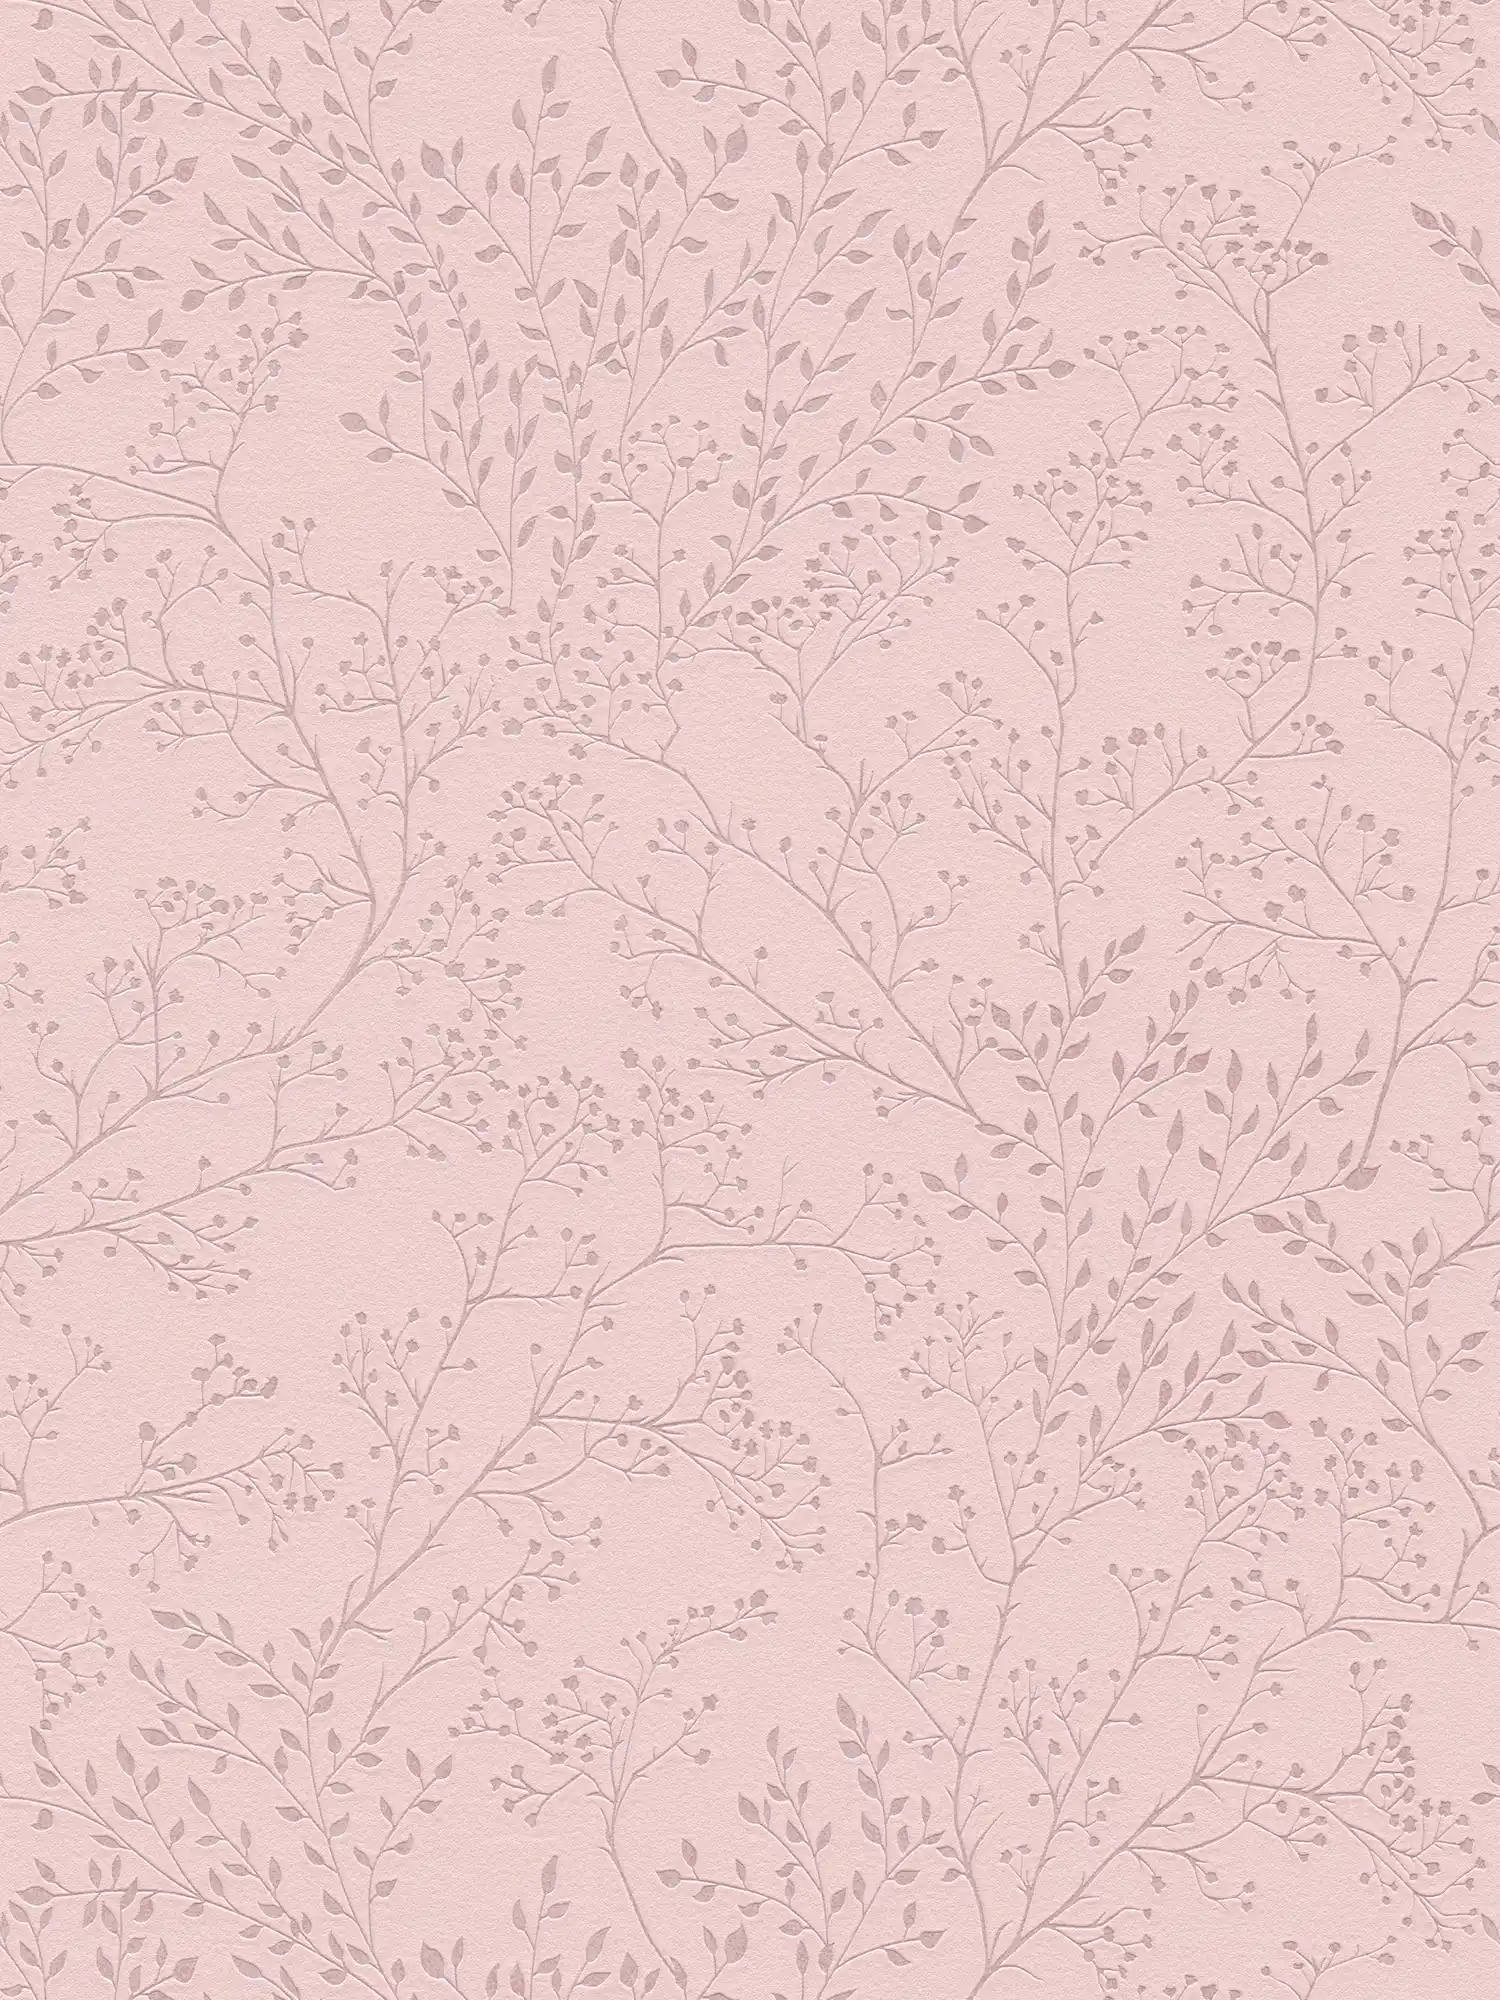 Plain wallpaper pink with leaves pattern, gloss & texture effect
